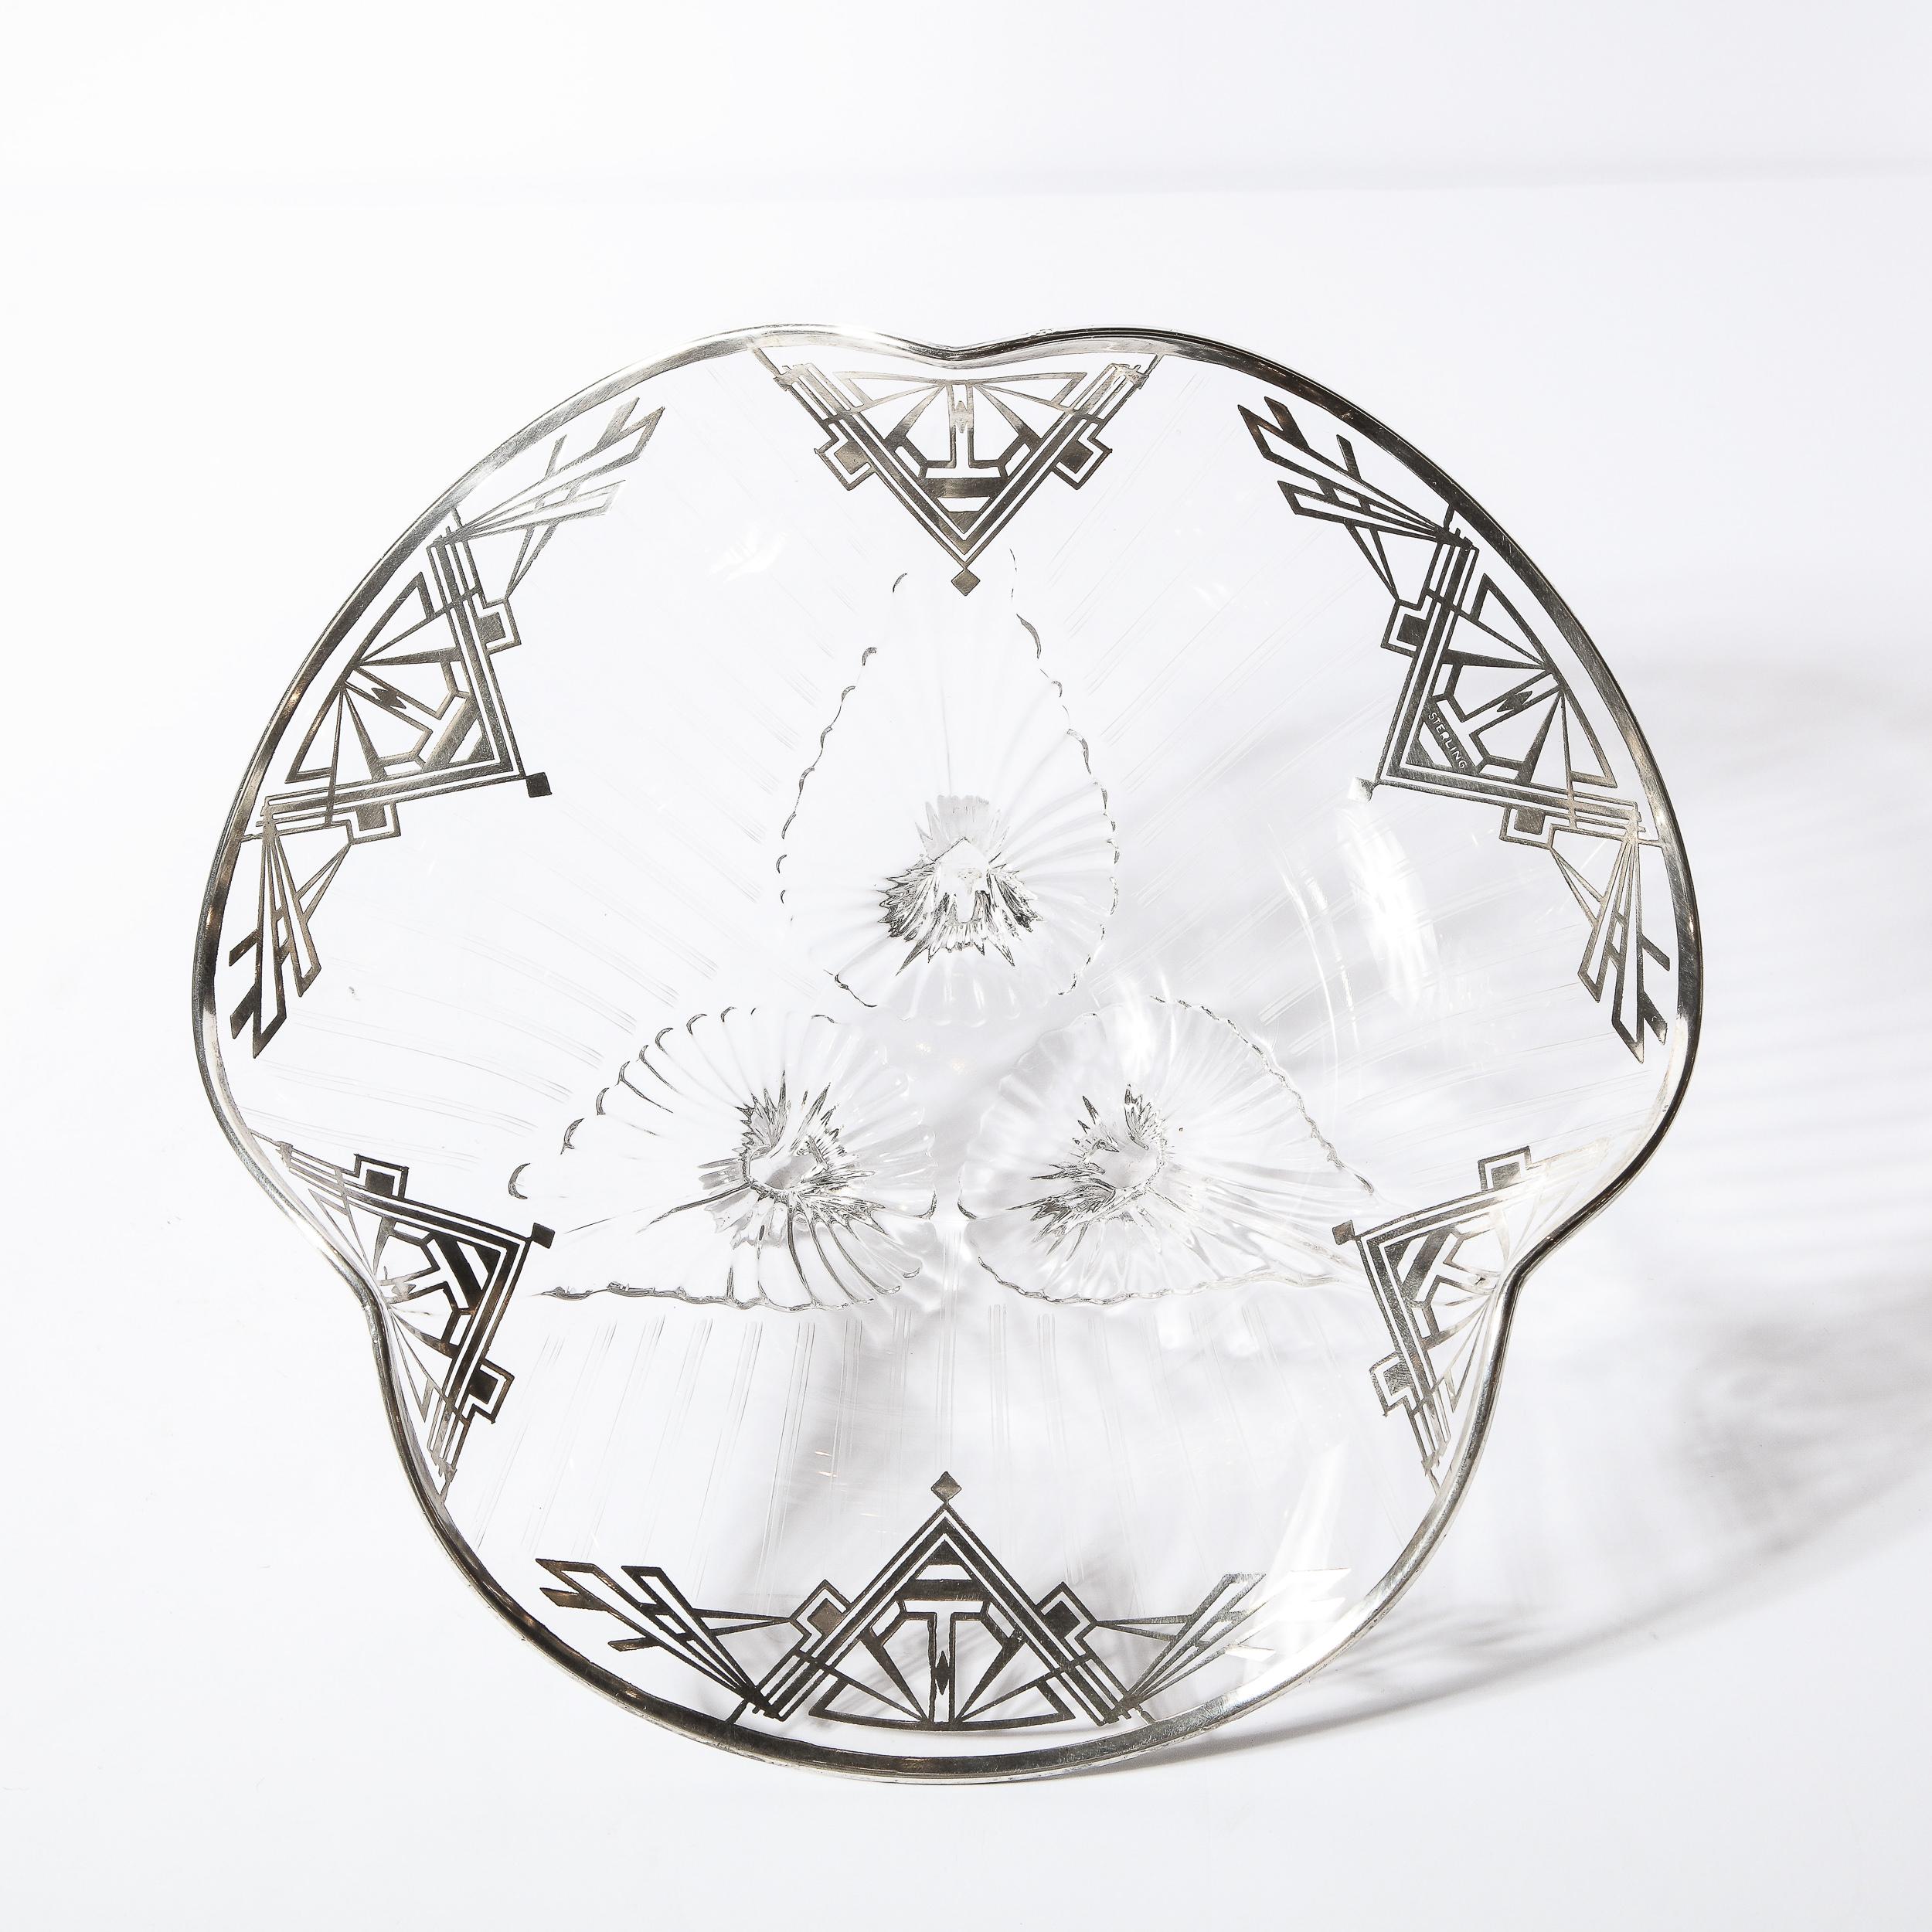 Art Deco Machine Age Translucent Glass Center Bowl with Sterling Silver Overlay For Sale 4